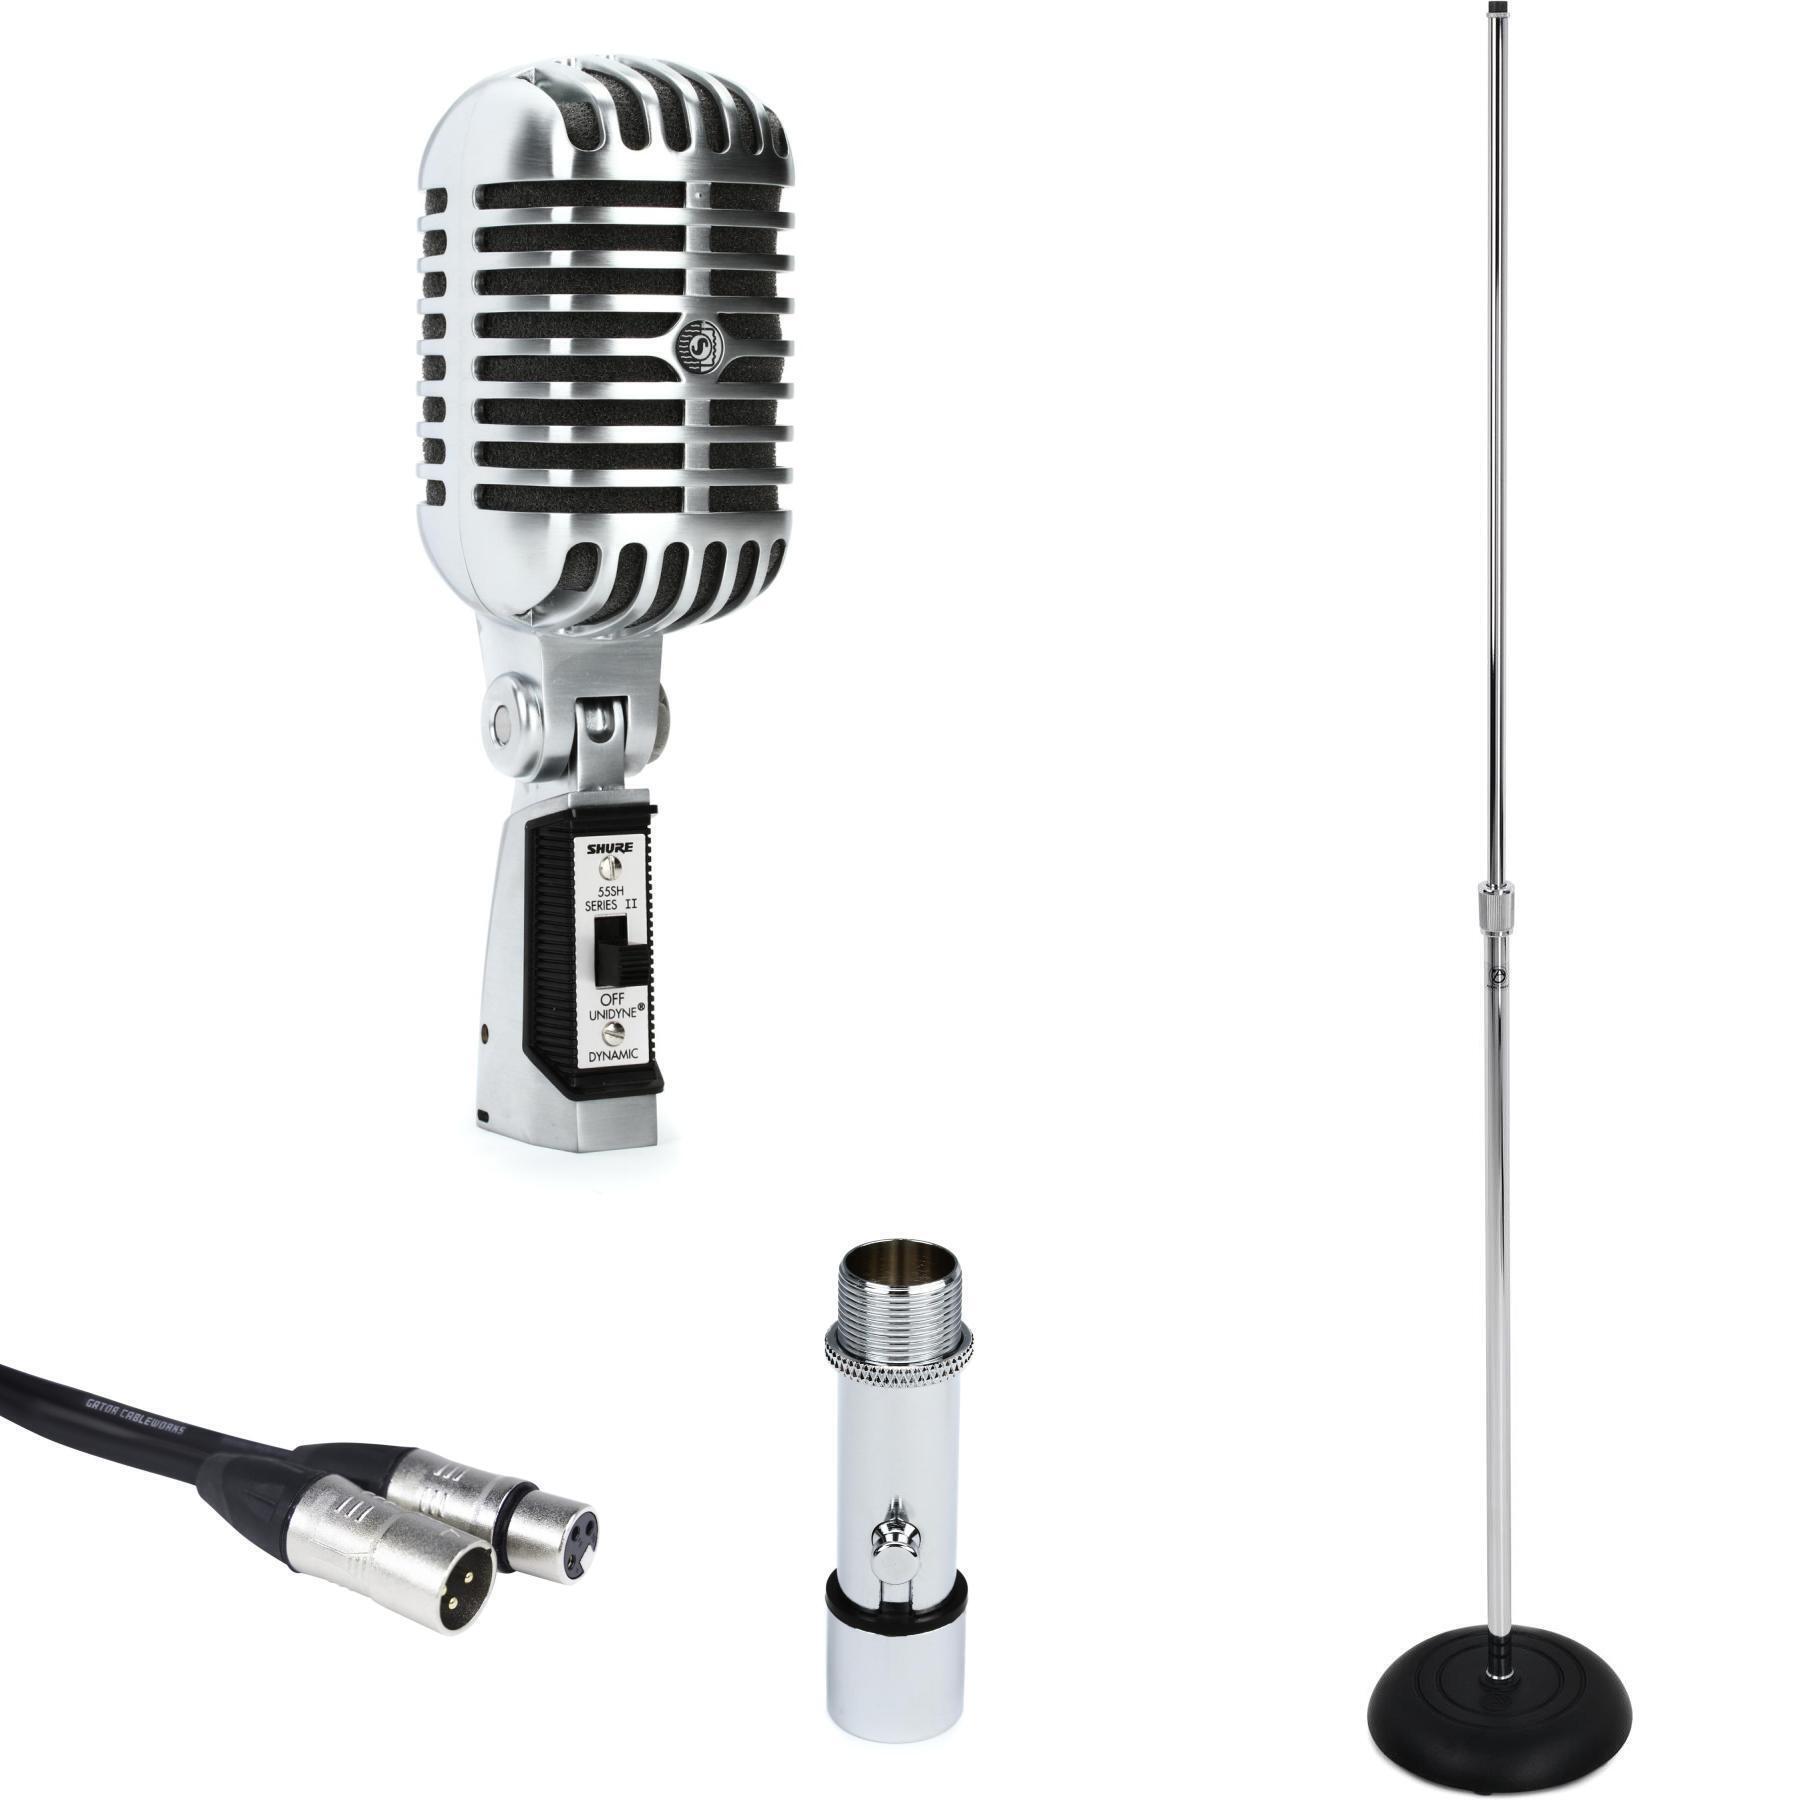 Shure 55SH Series II Cardioid Dynamic Vocal Microphone and 